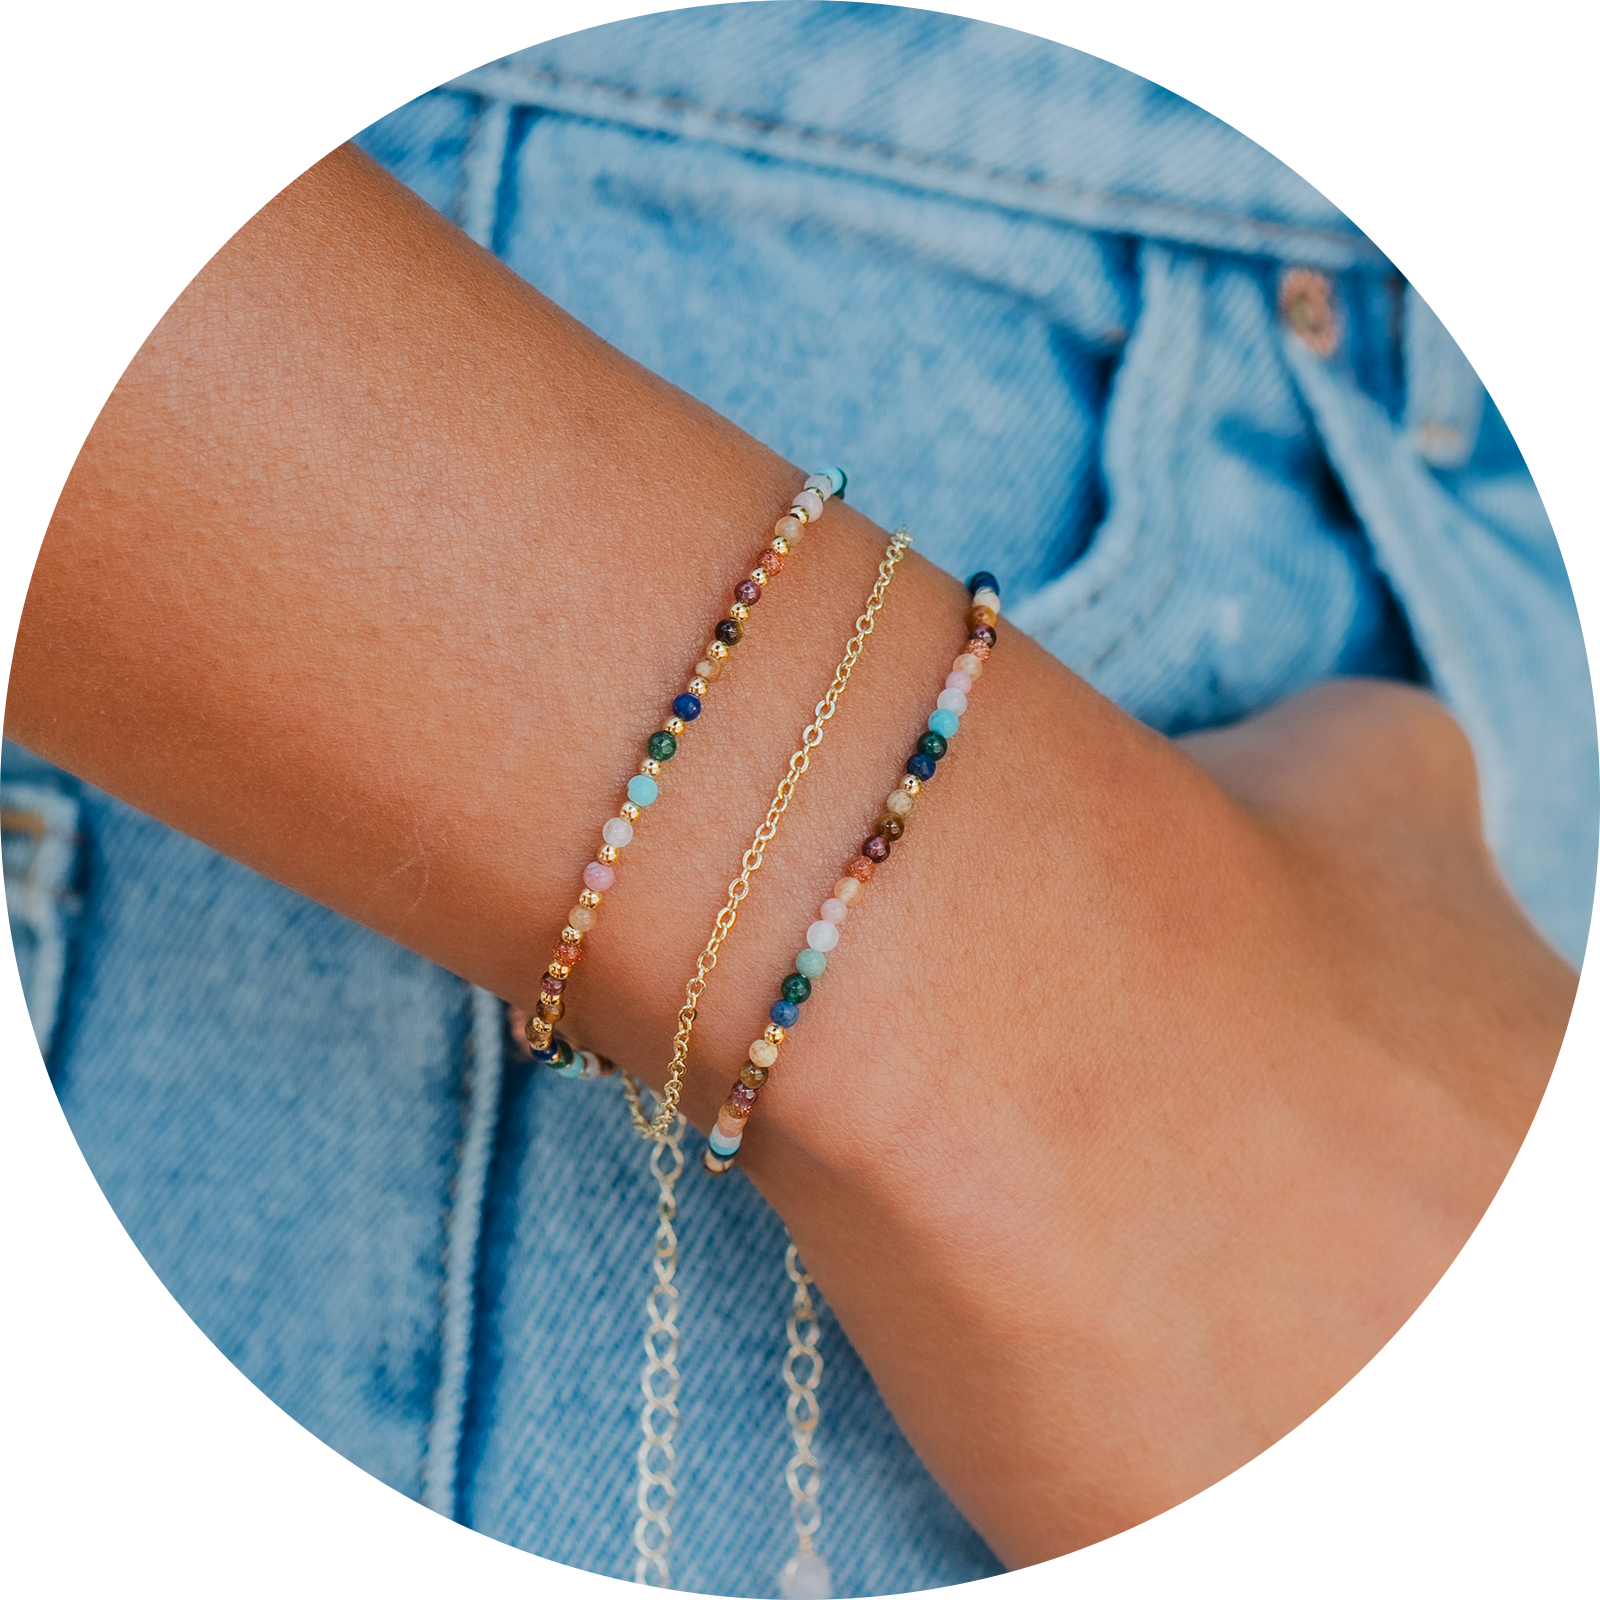 Layered bracelet stack with a rainbow stone and gold bead bracelet, a dainty gold chain bracelet and a rainbow stone bracelet